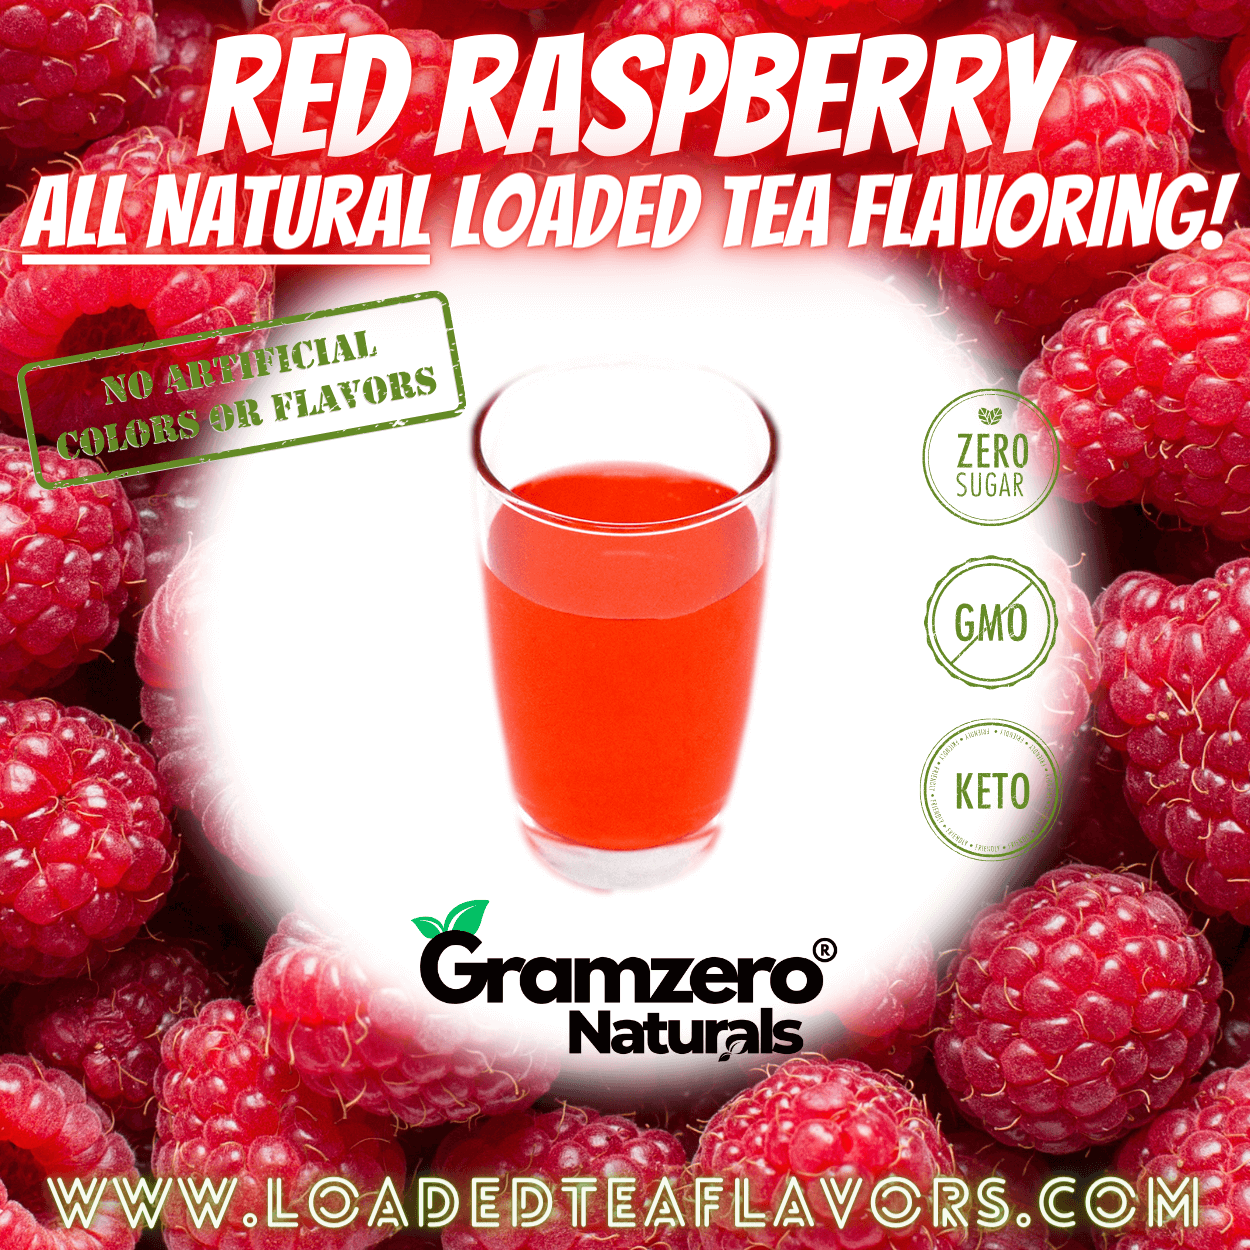 All Natural RED RASPBERRY Sugar Free Drink Mix ❤️ Loaded Tea Flavoring